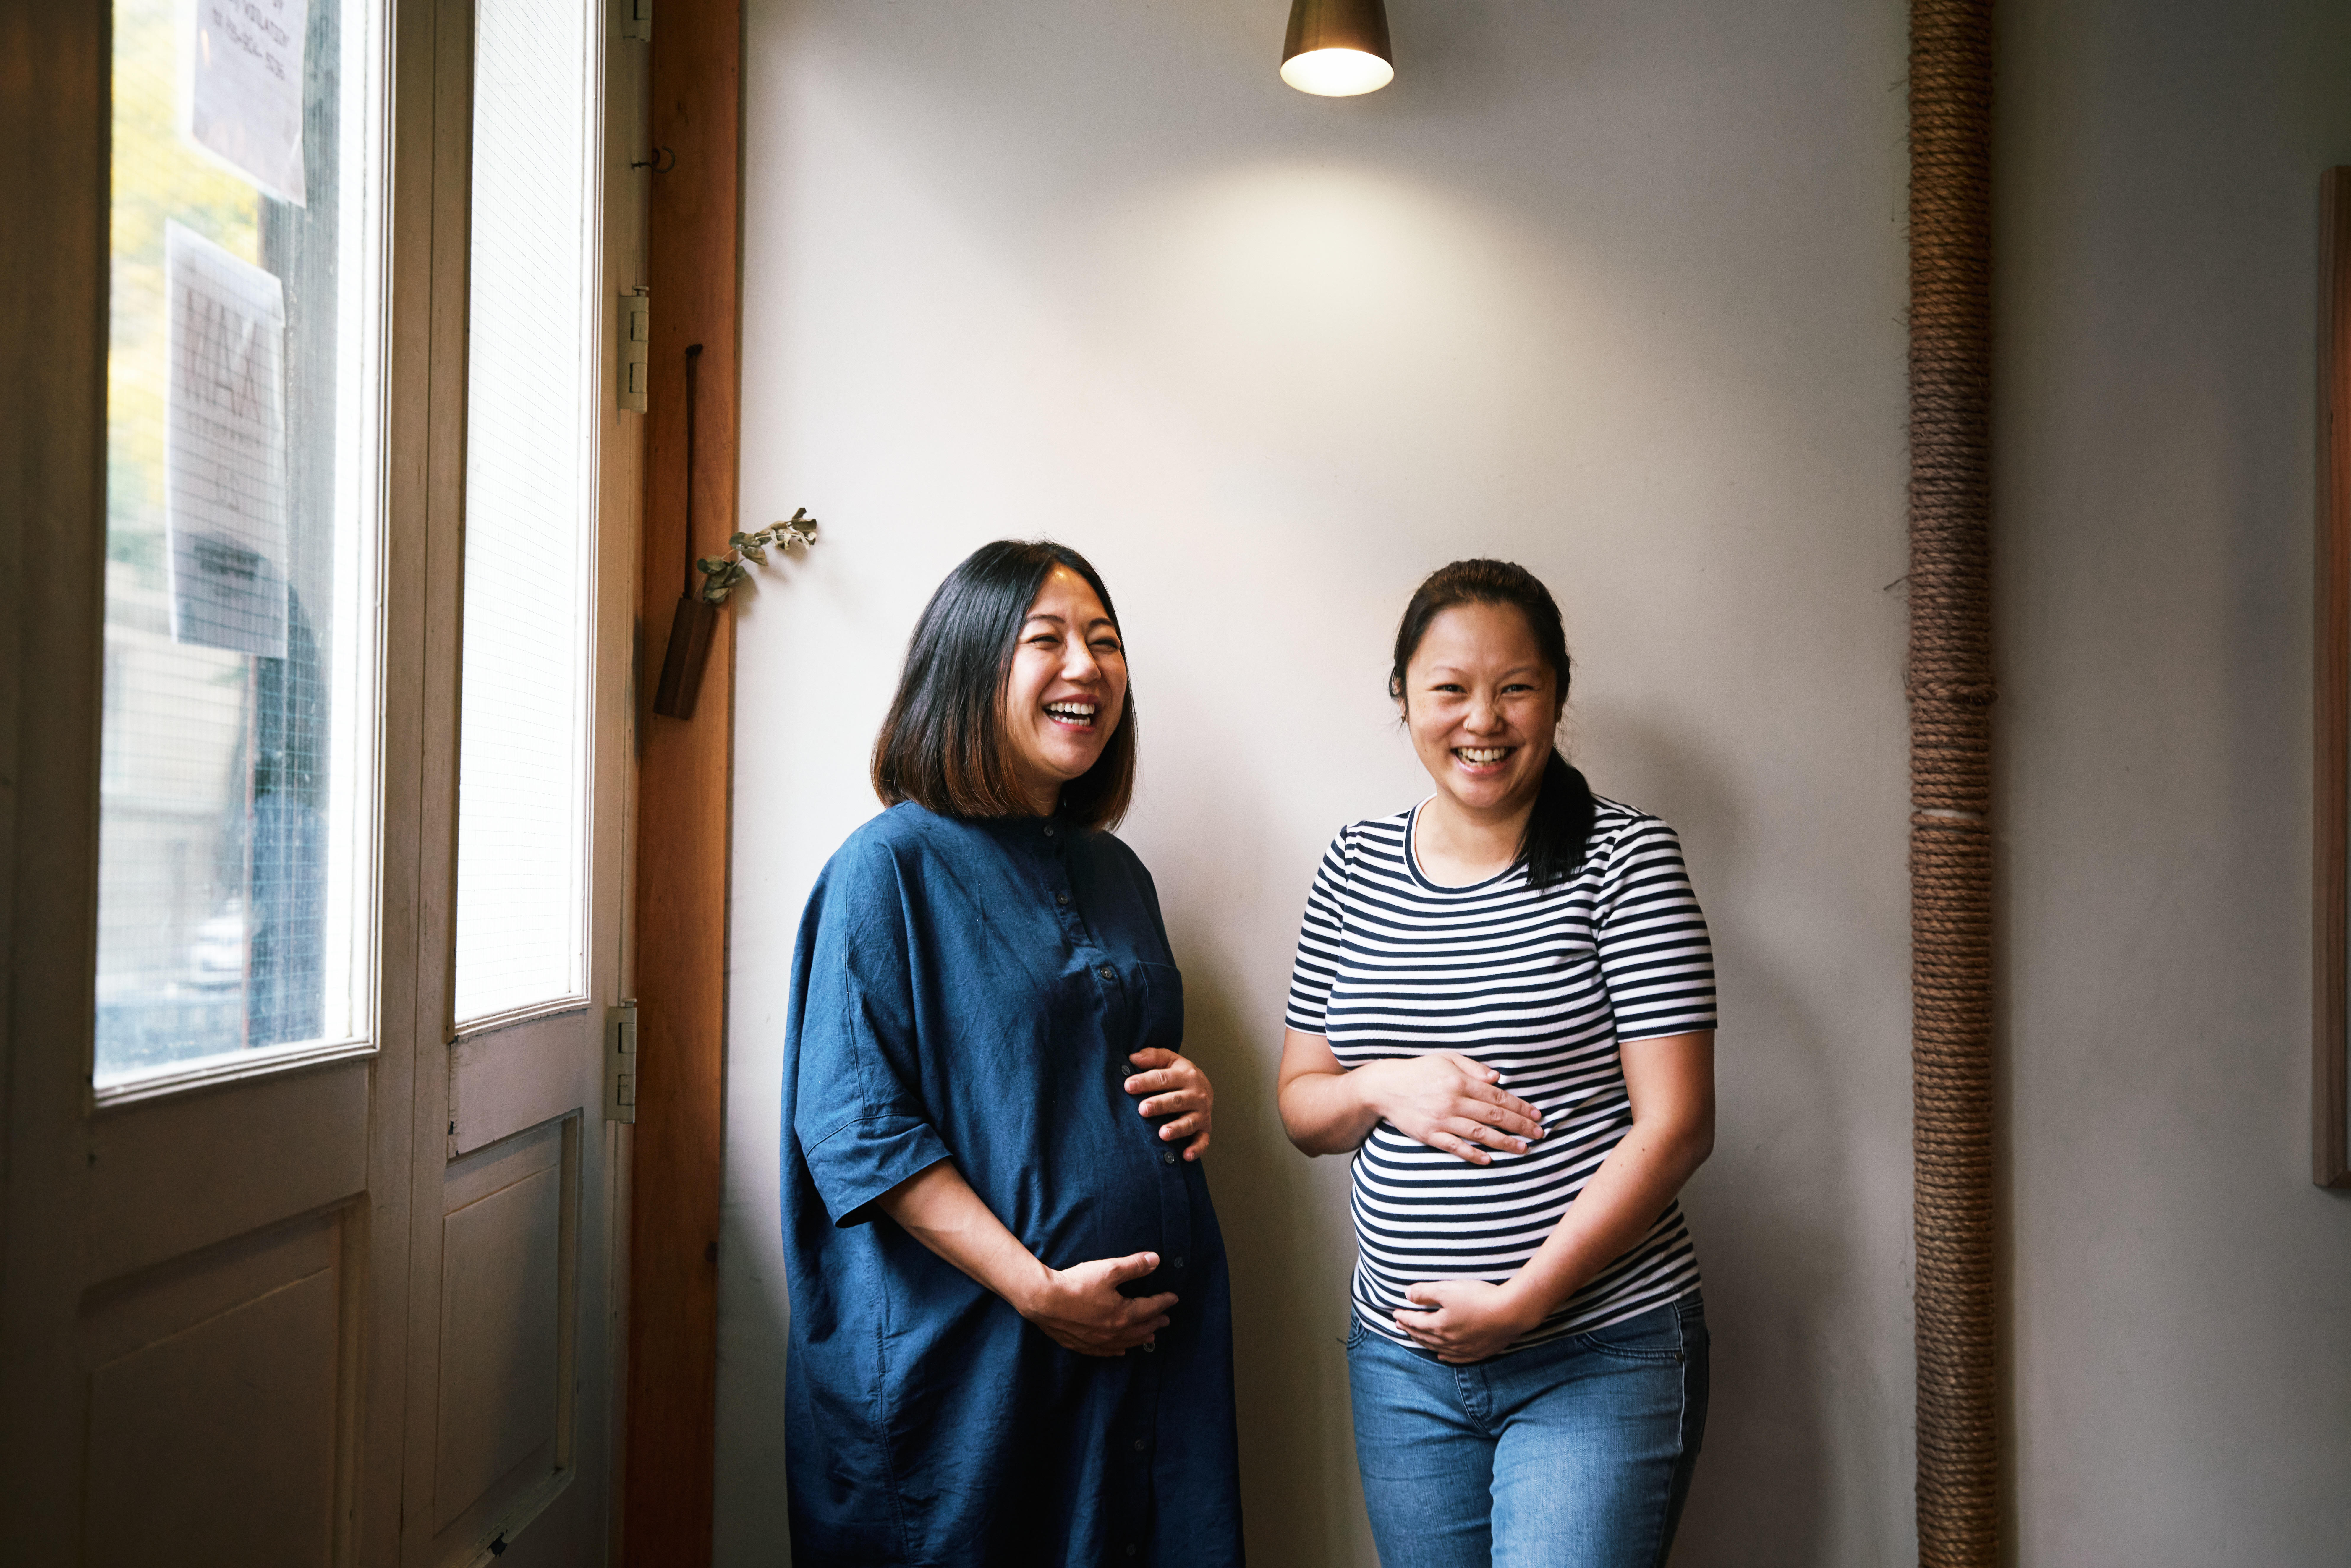 Two smiling and visibly pregnant women stand next to one another inside a restaurant